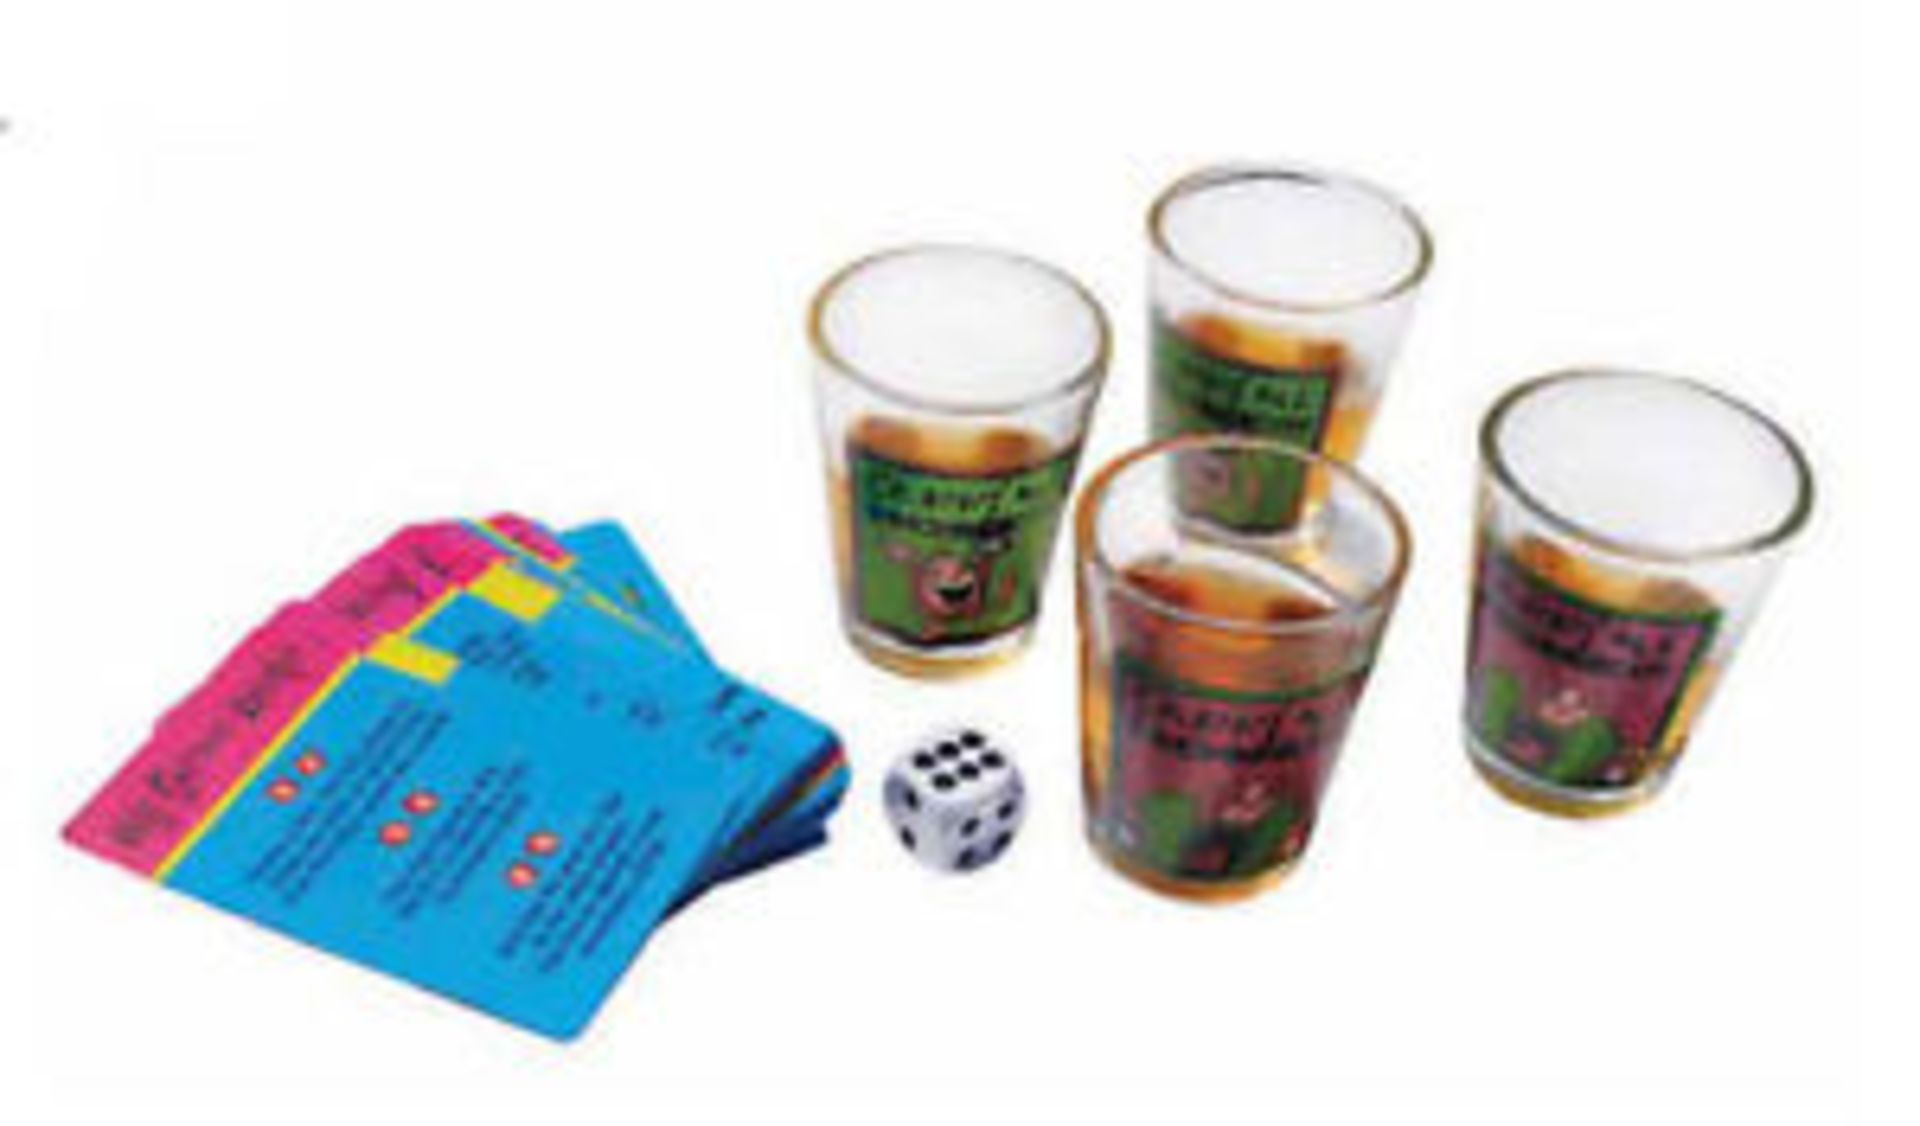 V *TRADE QTY* Brand New Drinking Card Games Includes 4 Shot Glasses & Dice (10 Different Games) X200